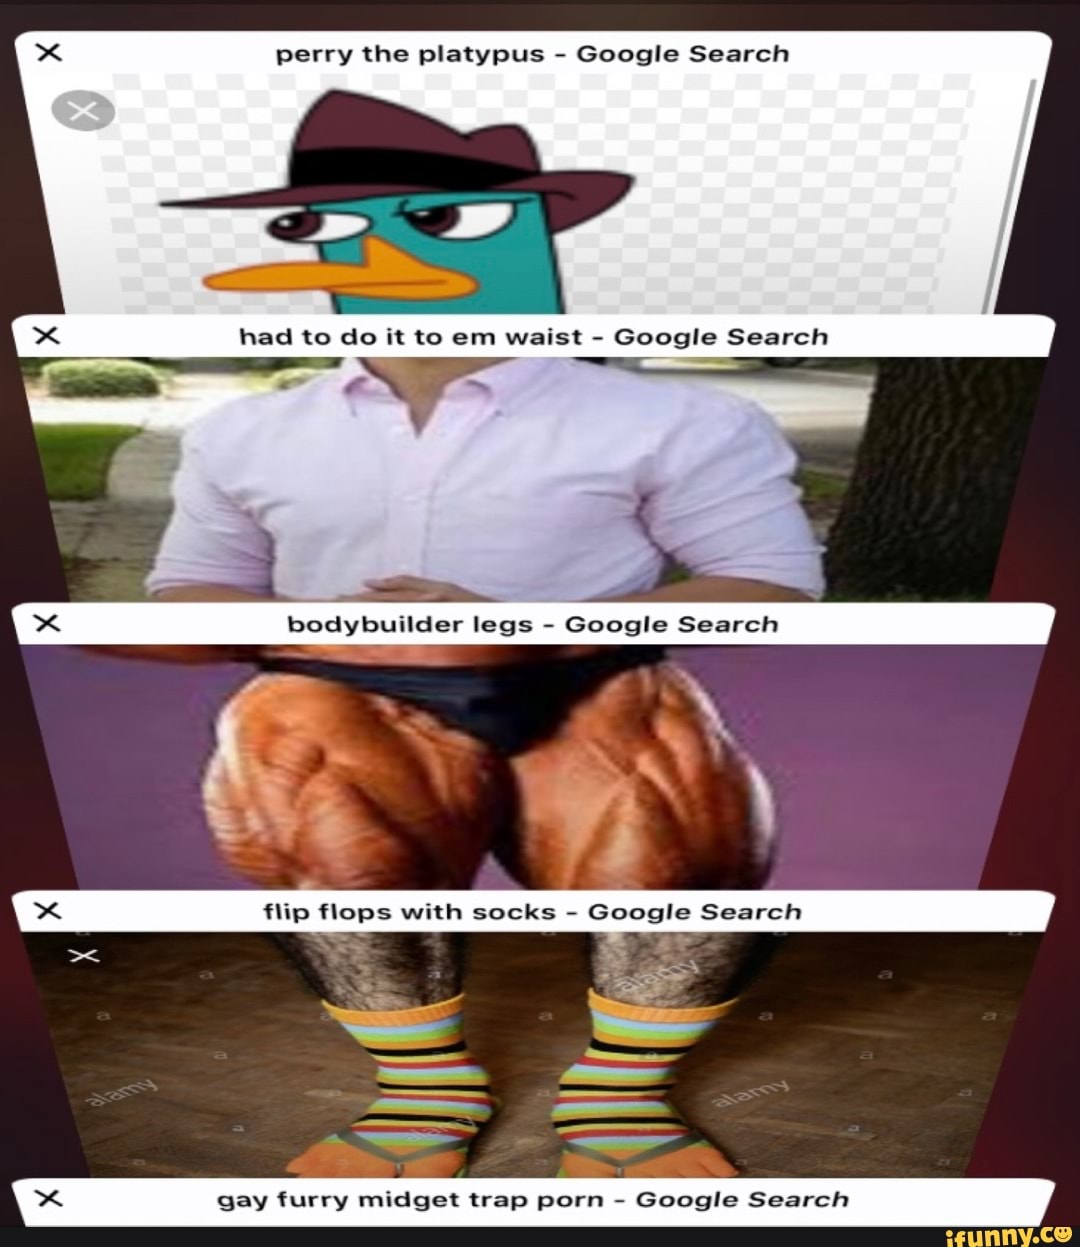 Porn Midget In Cowboy Hat - Perry the platypus - Google Search Ã  had to do it to em ...